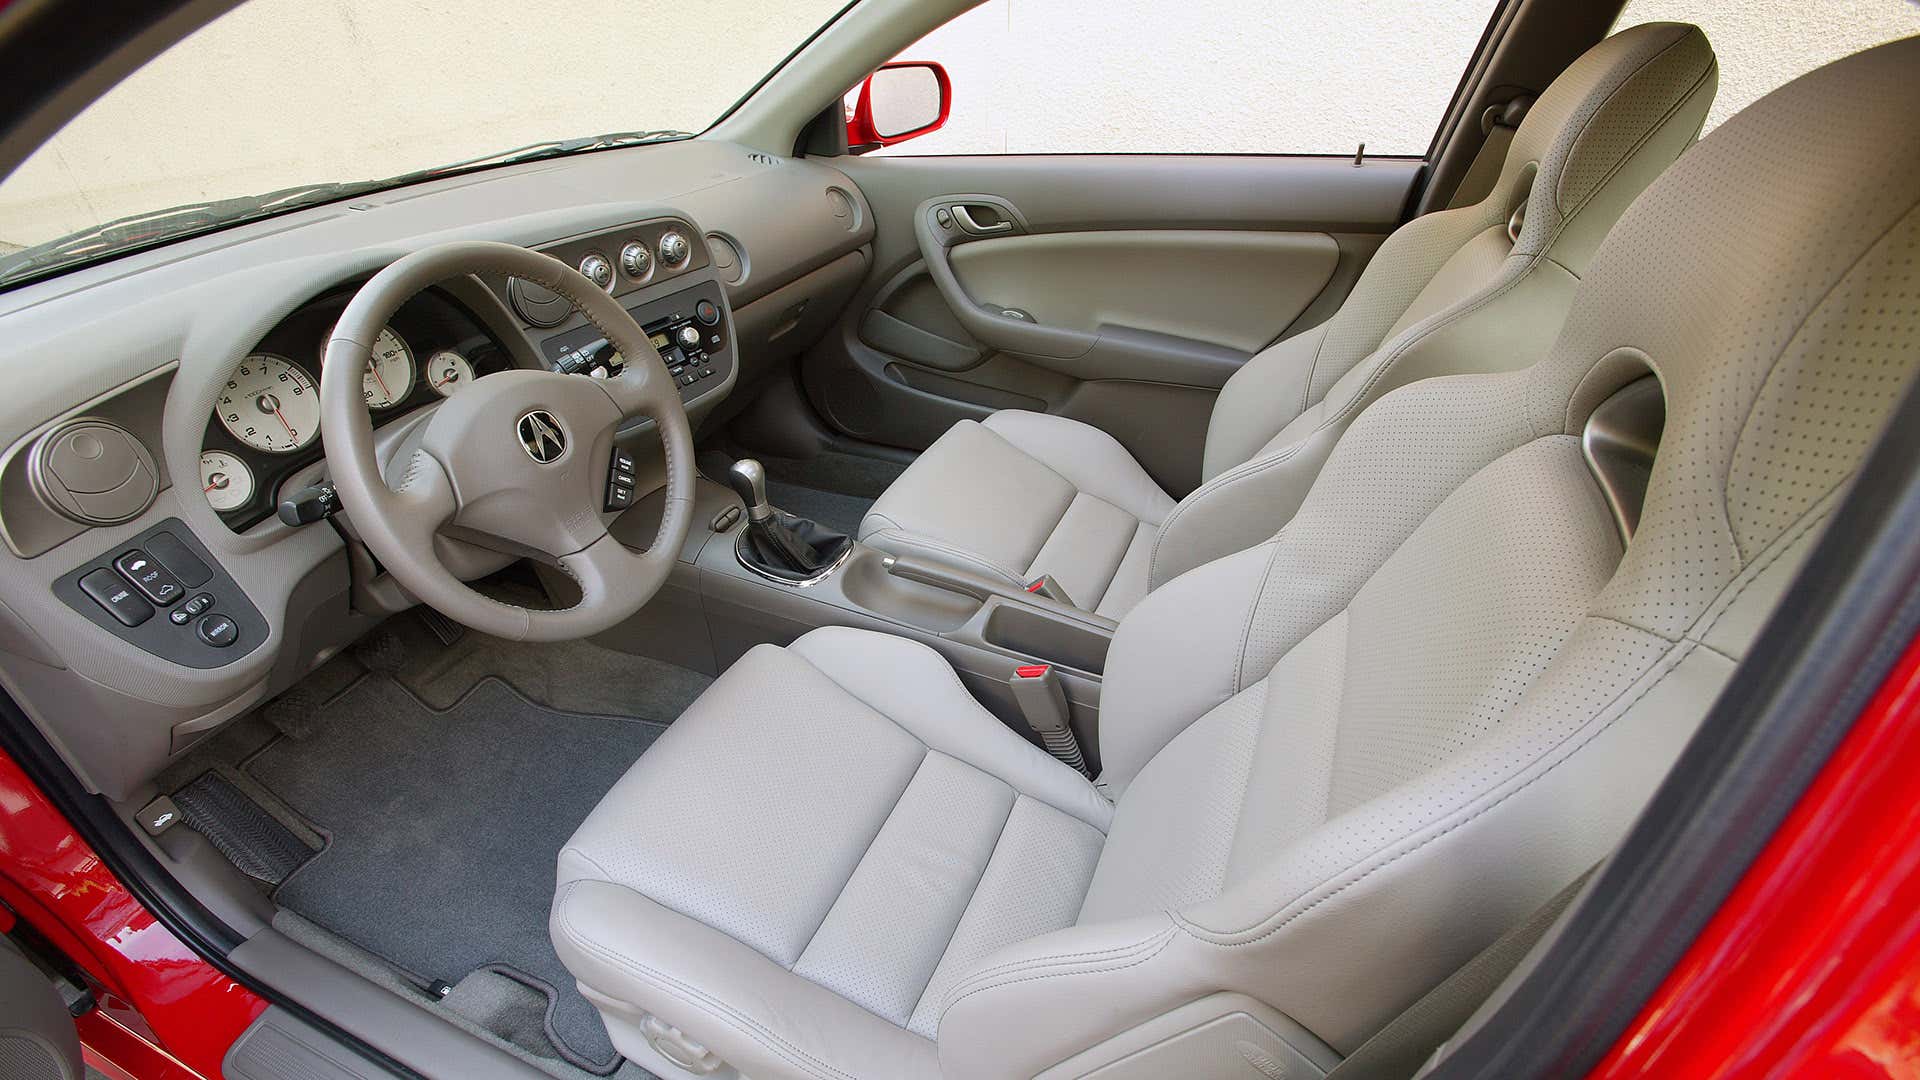 A 2006 Acura RSX interior with tan leather.